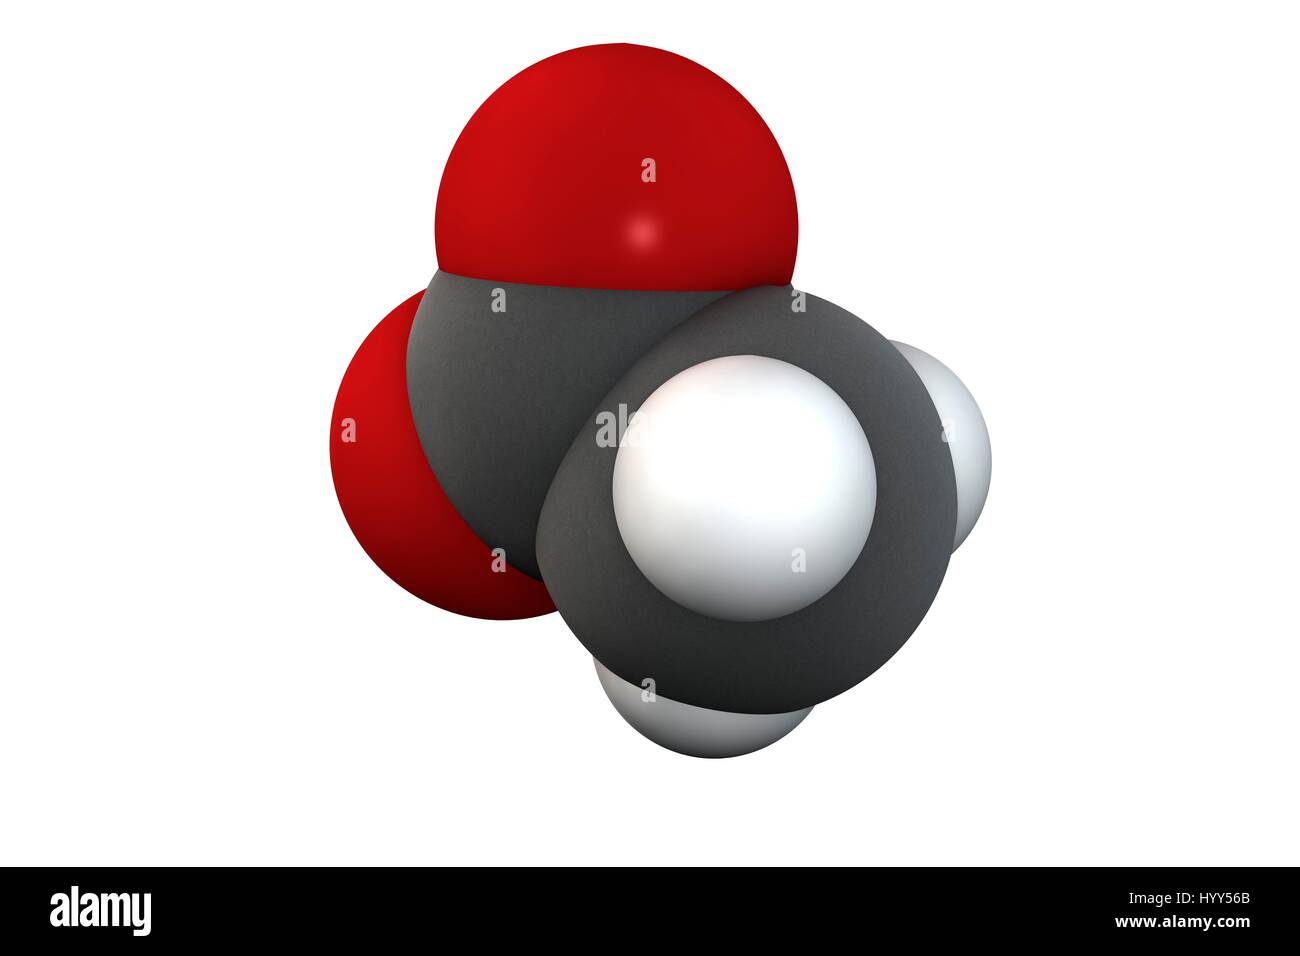 Acetic acid molecule. Vinegar is an aqueous solution of acetic acid. Chemical formula is C2H3O2. Atoms are represented as spheres: carbon (grey), hydrogen (white), oxygen (red). Illustration. Stock Photo